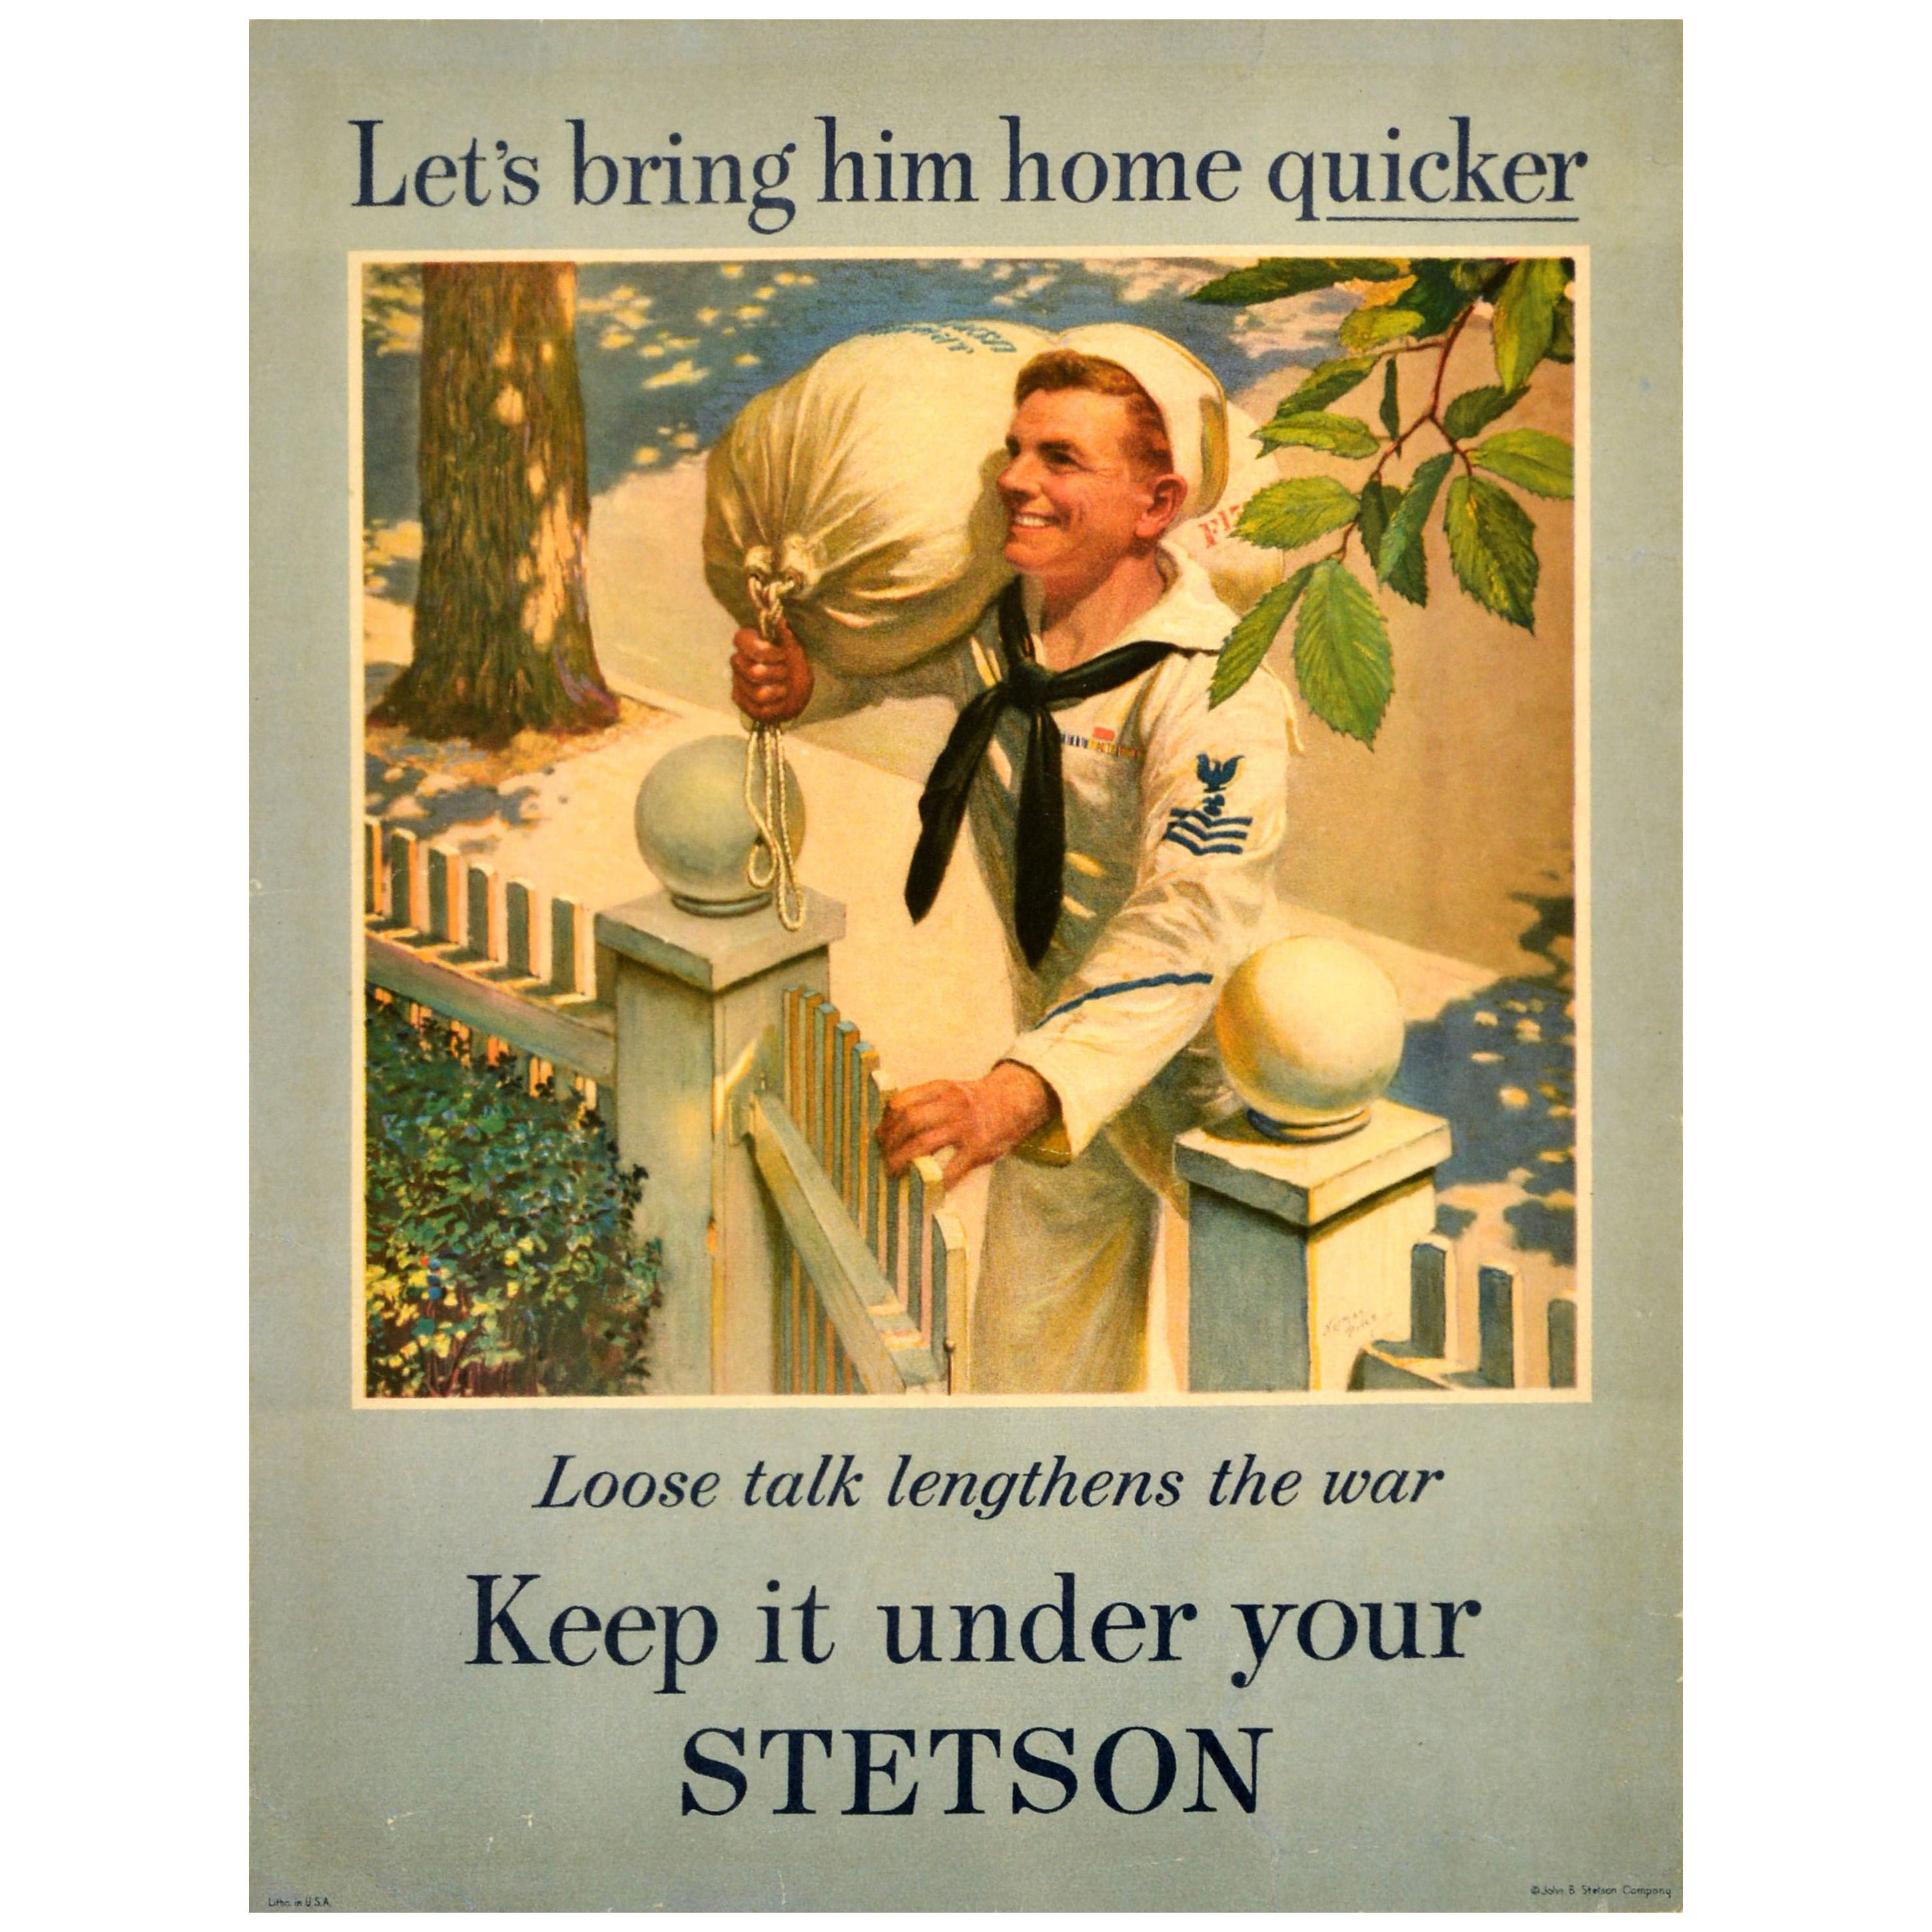 Original Vintage Advertising Poster Keep It Under Your Stetson Bring Him Home For Sale